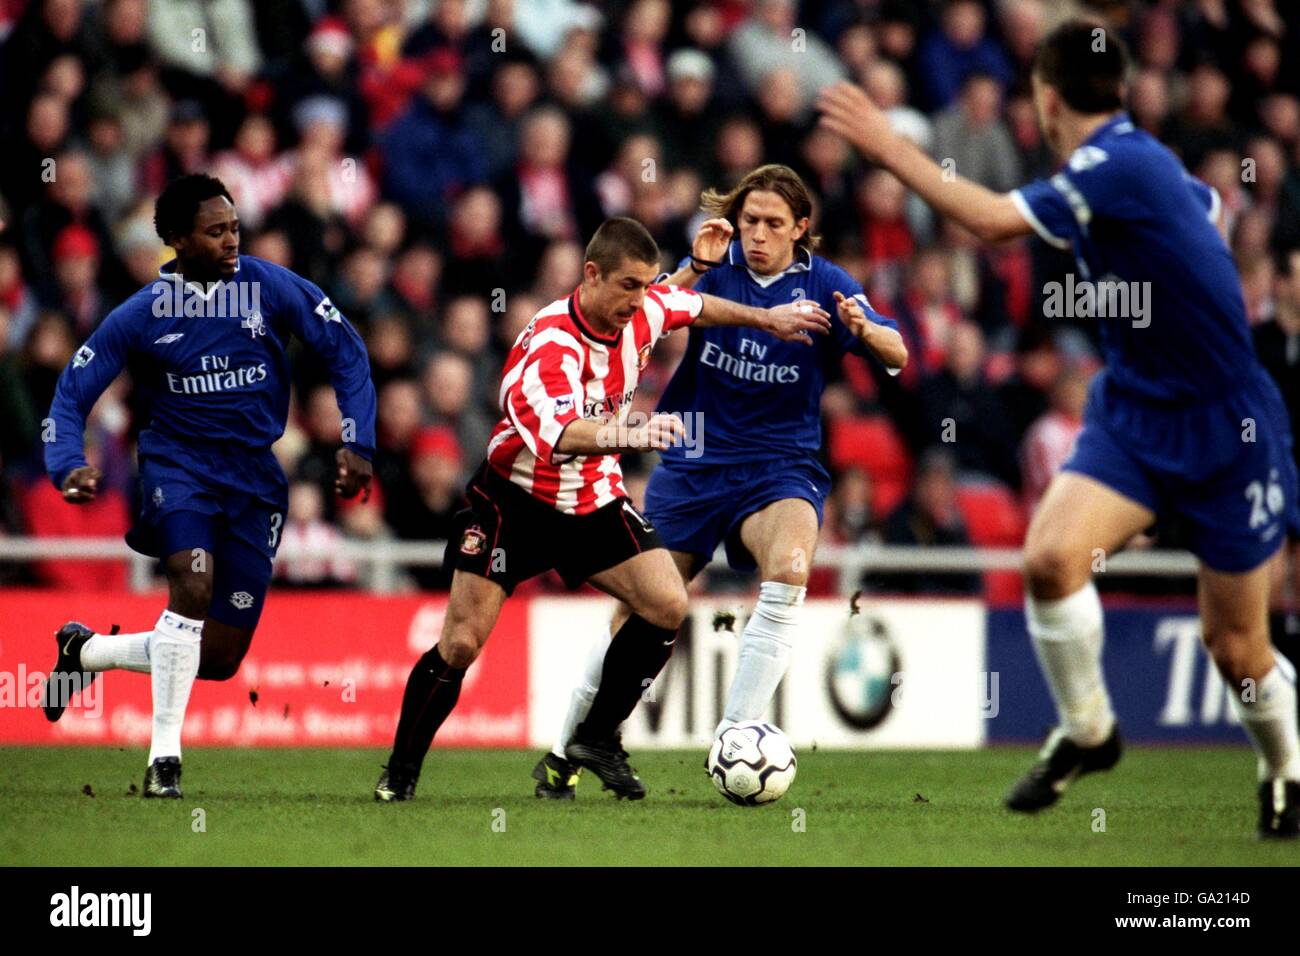 Sunderland's Kevin Philips battles for the ball and pushes away Chelsea's Sam Dalla Bona Stock Photo